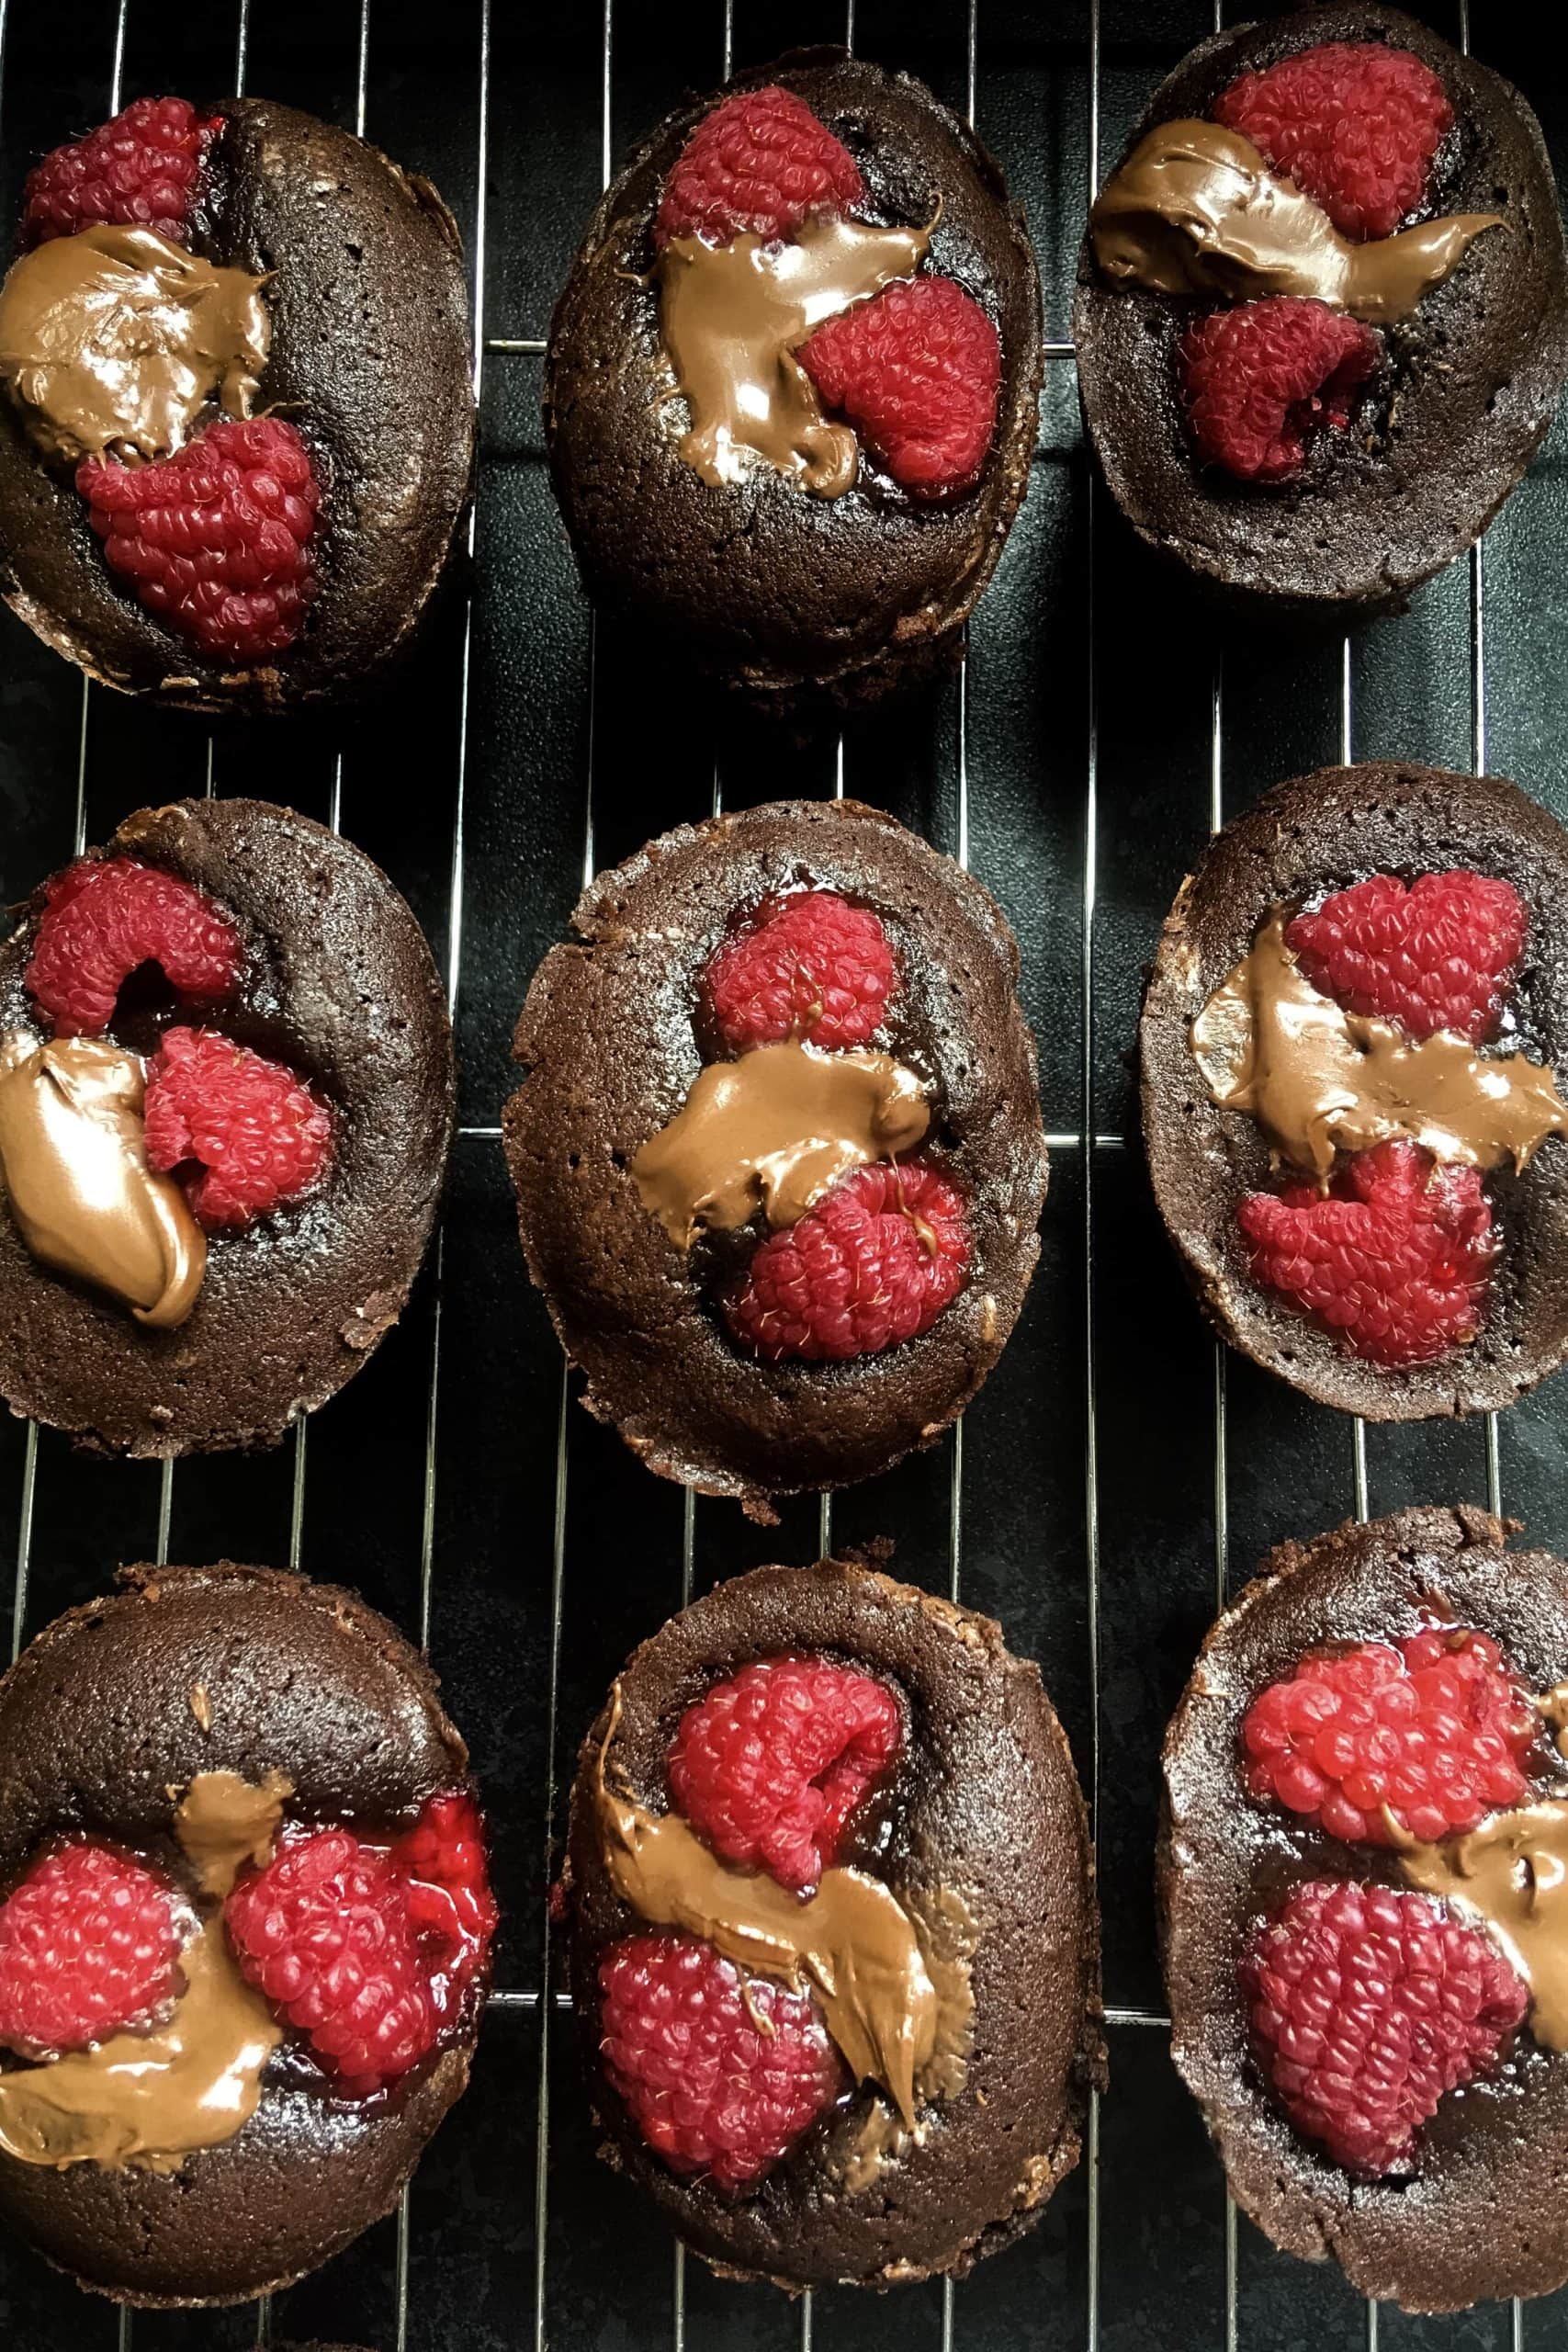 Nine little round chocolate cakes topped with fresh raspberries and hazelnut chocolate spread on a sliver wire rack